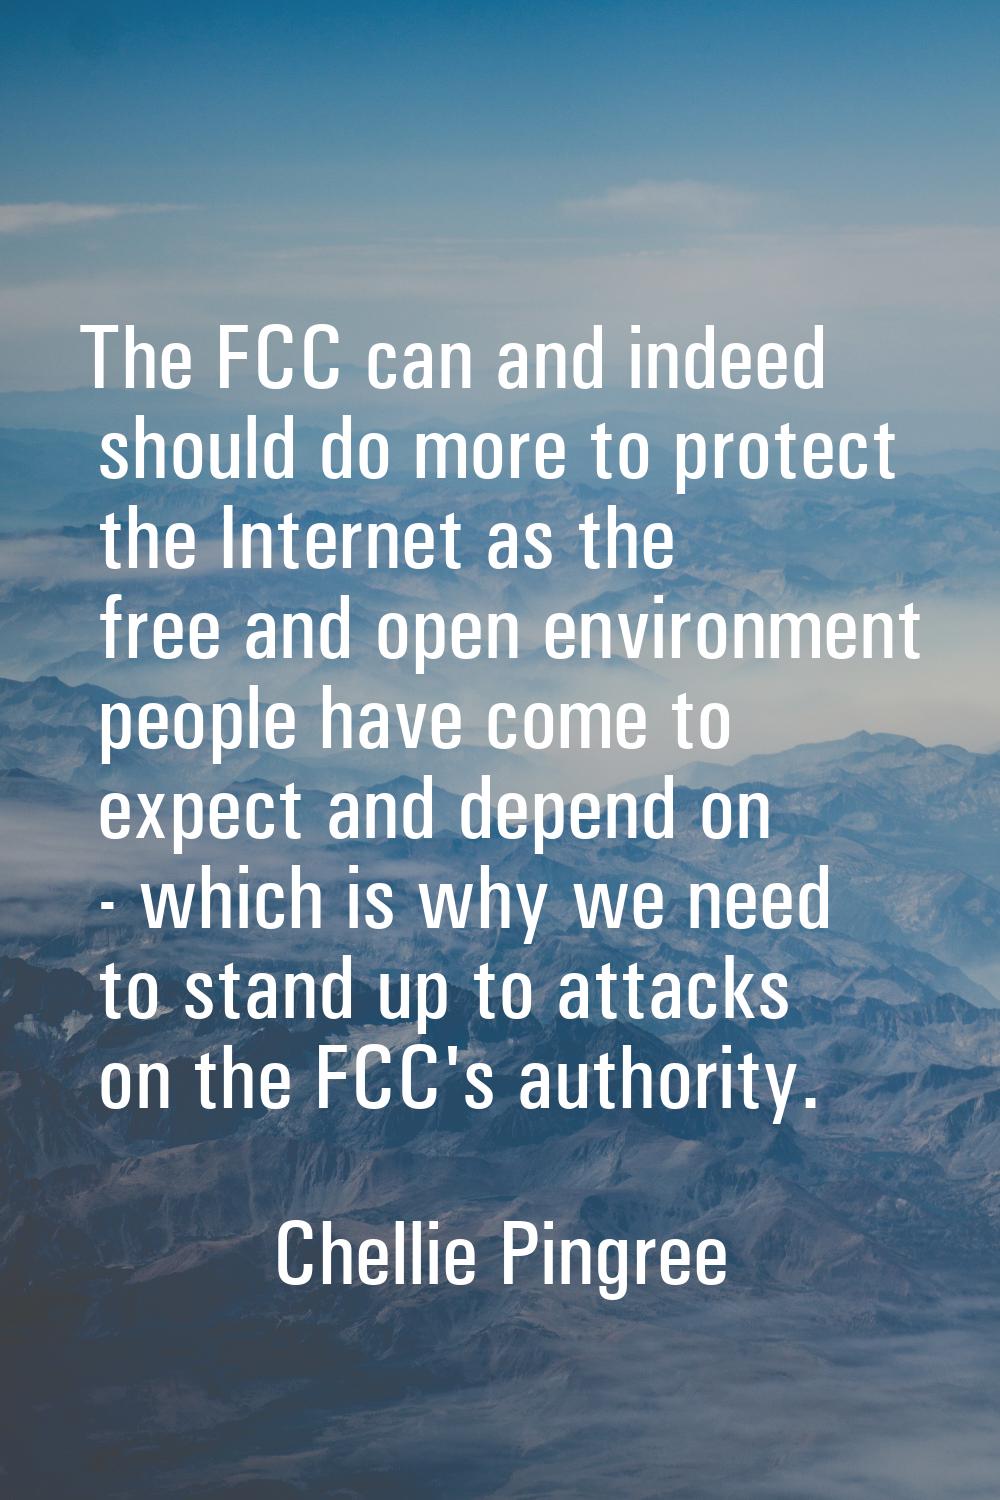 The FCC can and indeed should do more to protect the Internet as the free and open environment peop